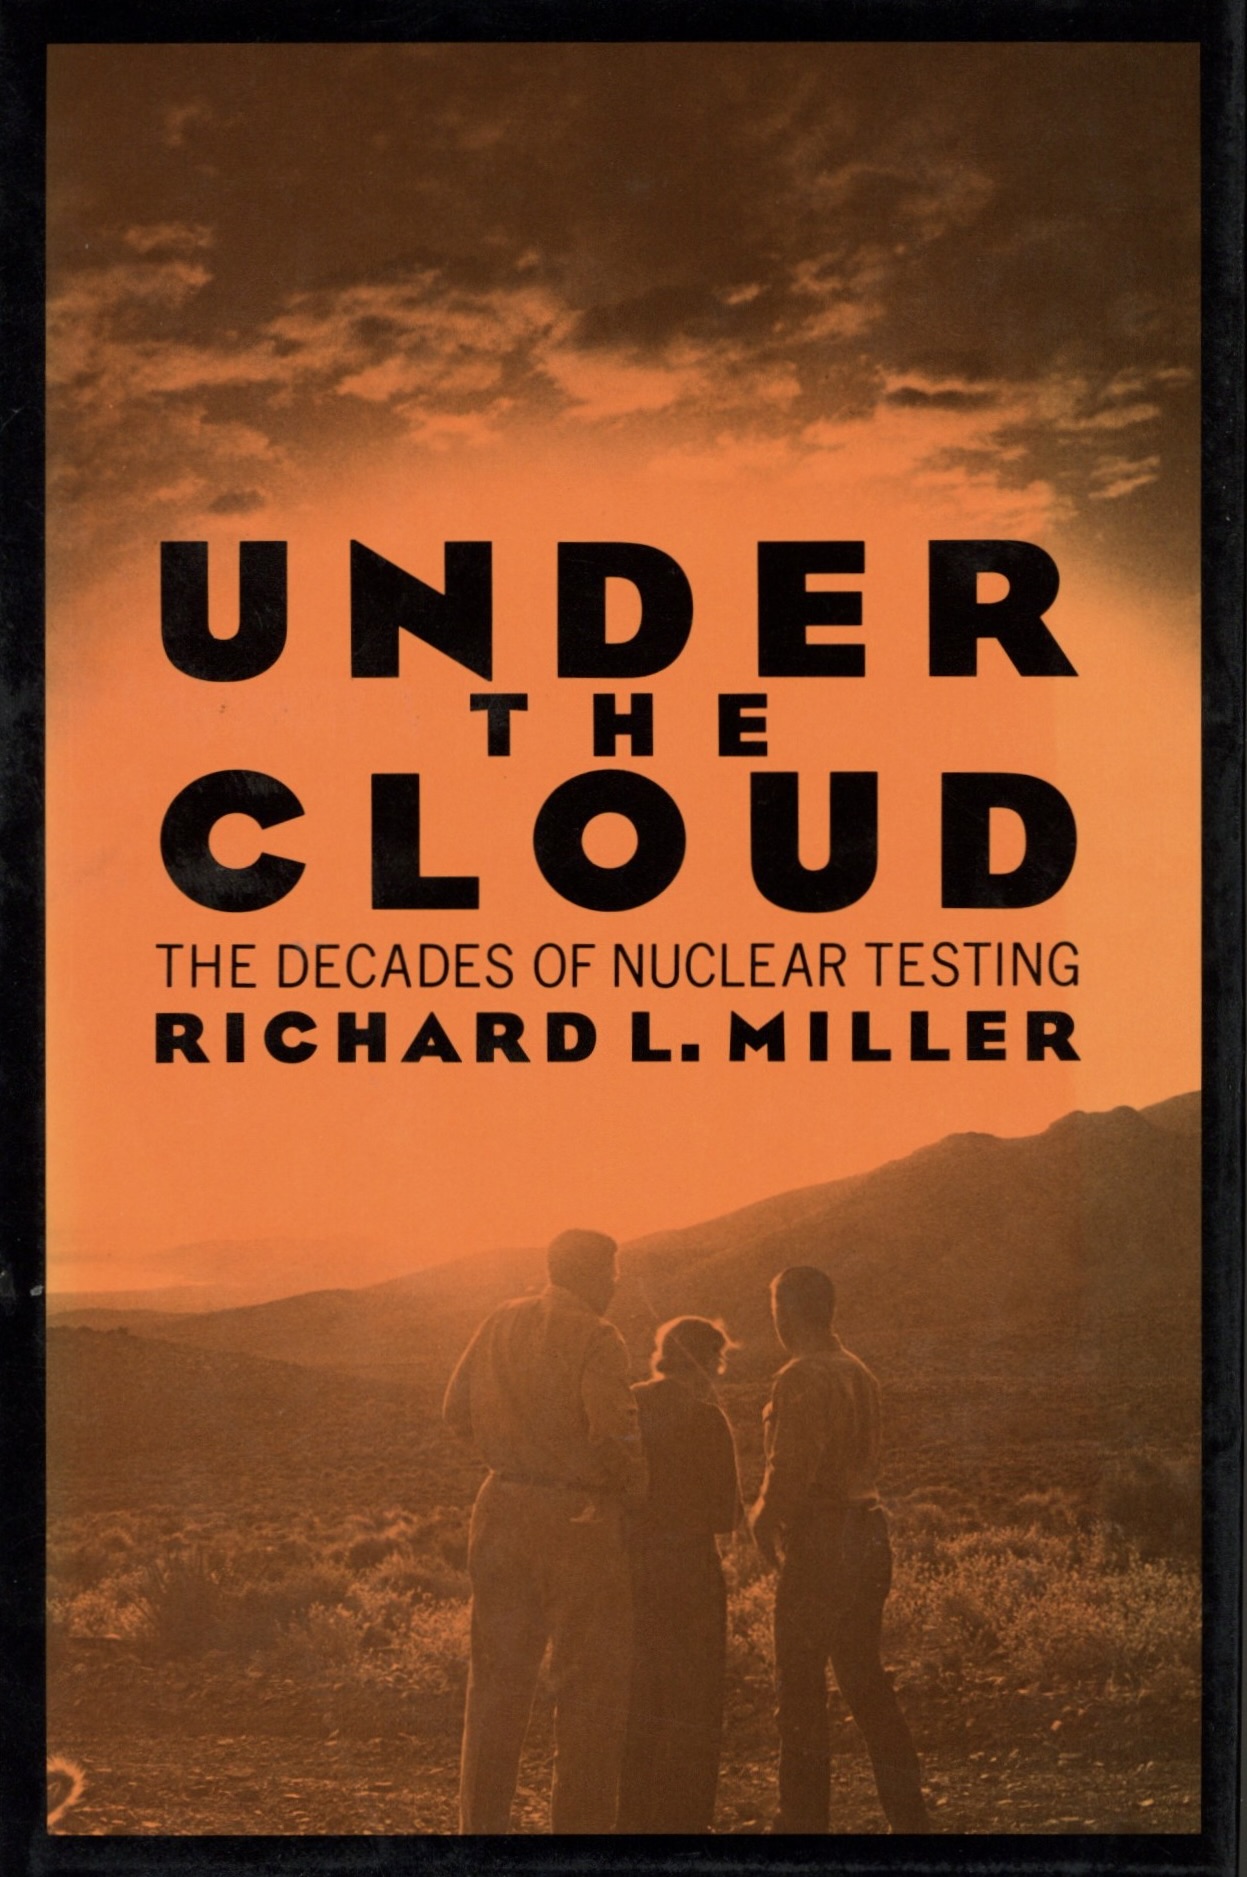 Under the Cloud: The Decades of Nuclear Testing - Richard L. Miller